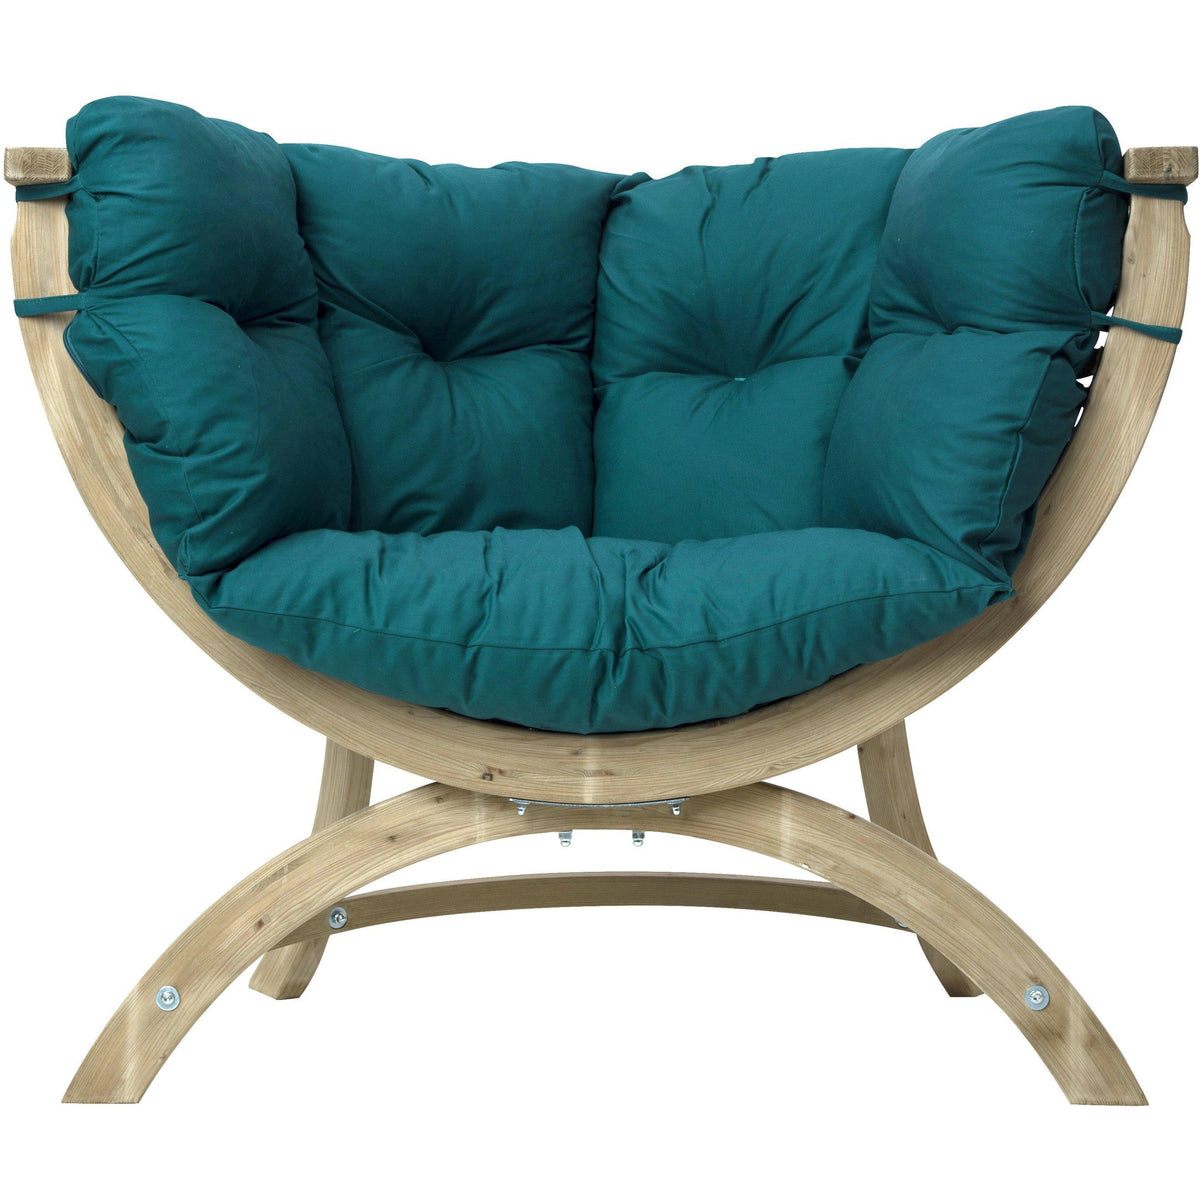 Siena UNO Chair, Green, from Byer of Maine